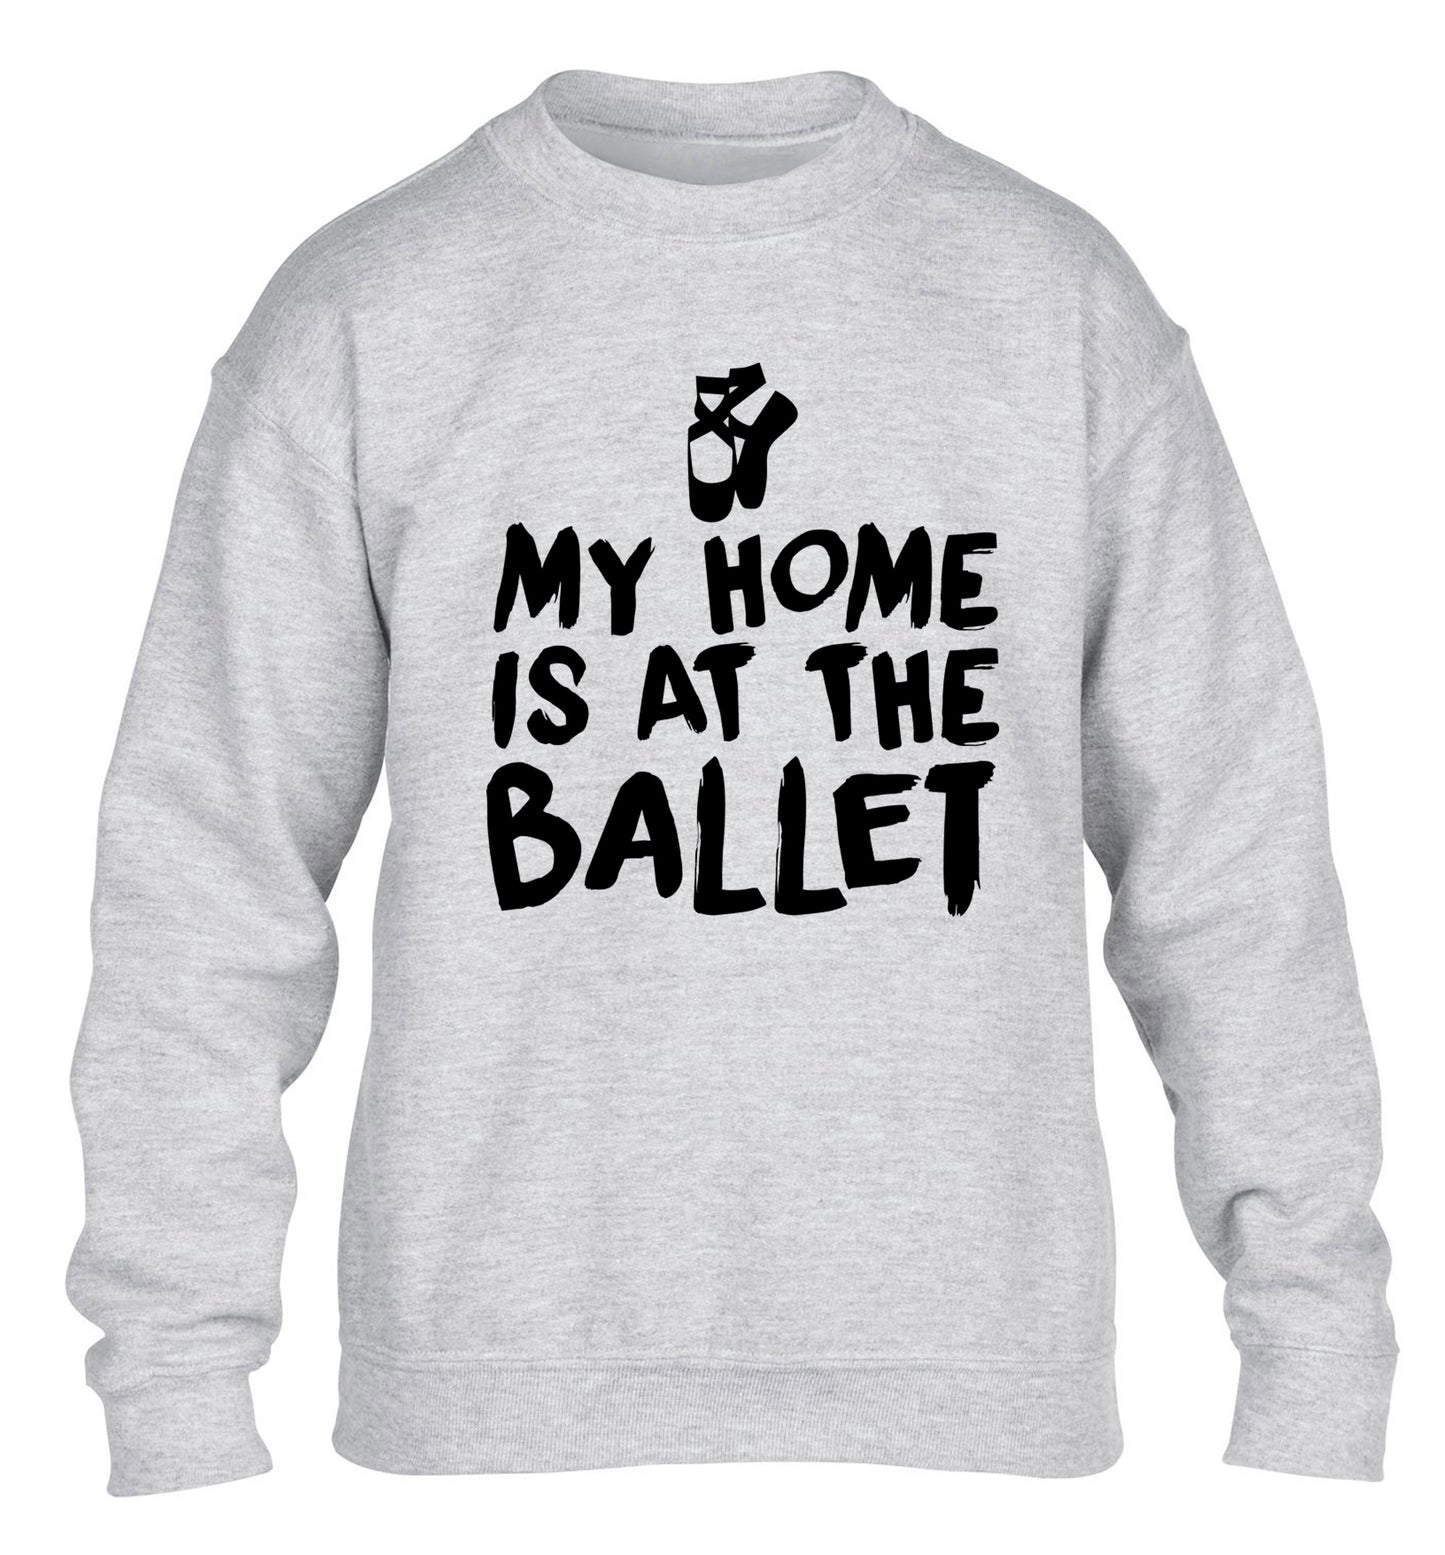 My home is at the dance studio children's grey sweater 12-14 Years